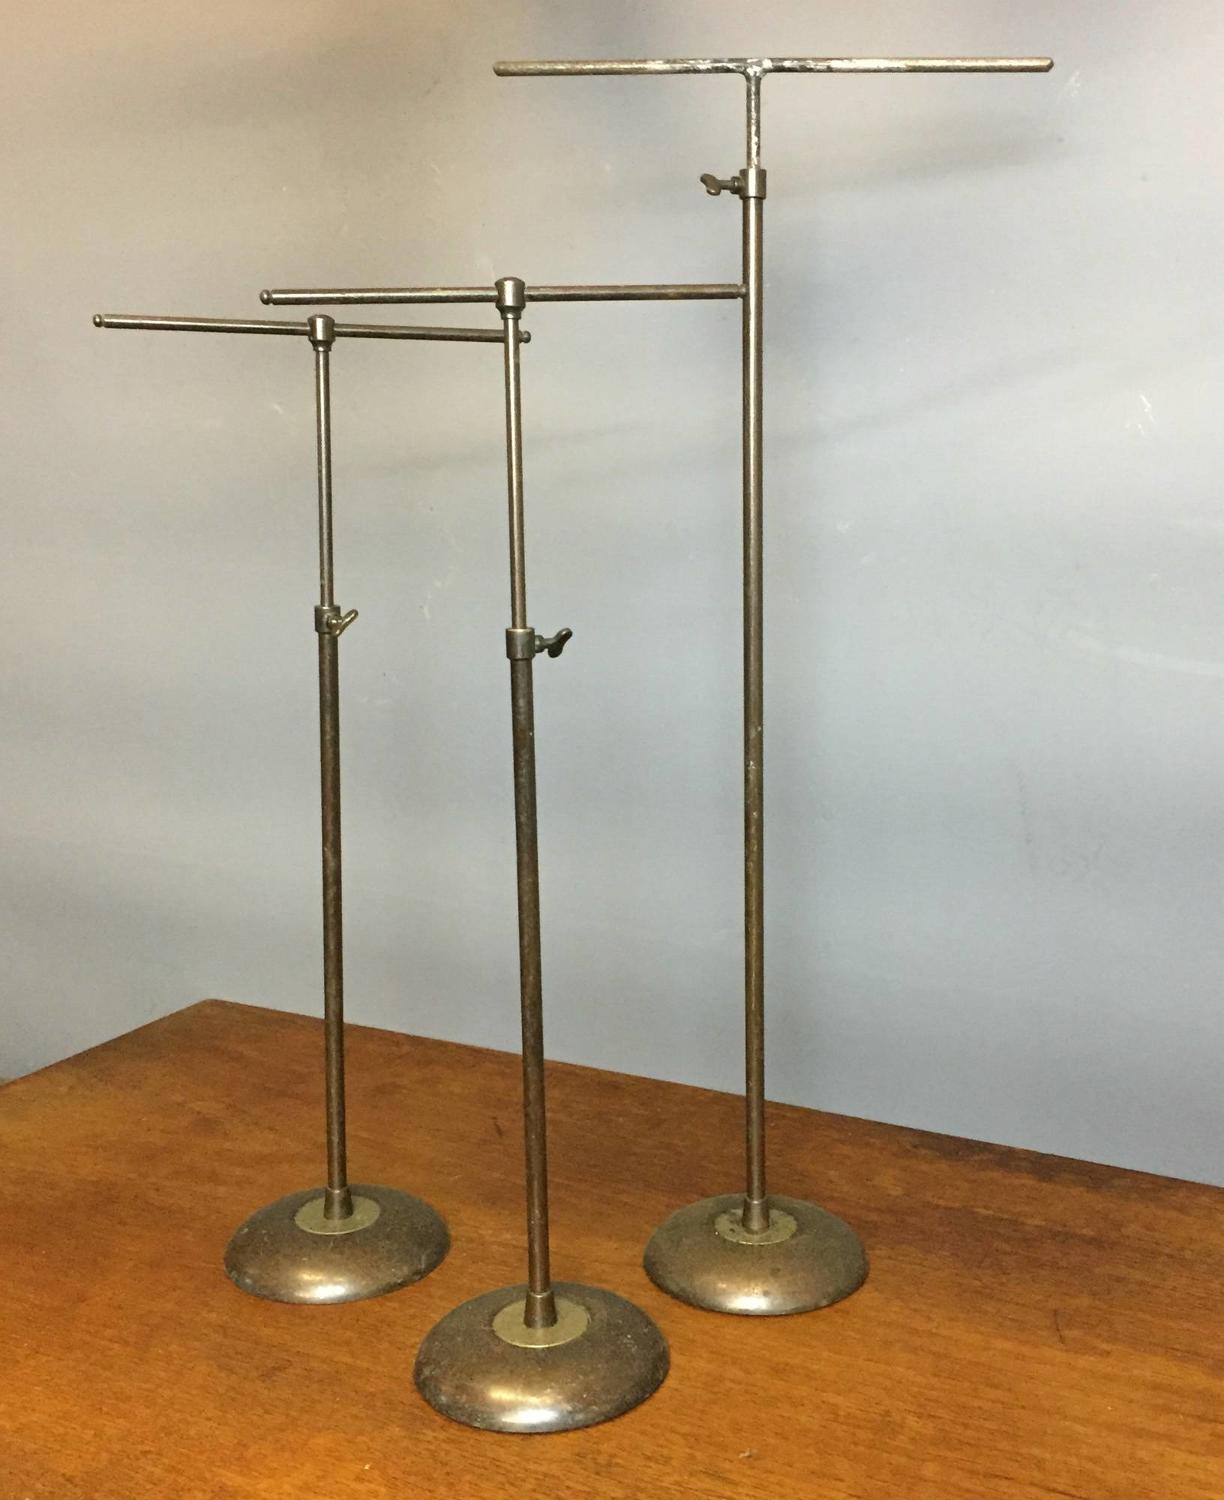 Vintage NORLYN Telescopic Shop Display Stands